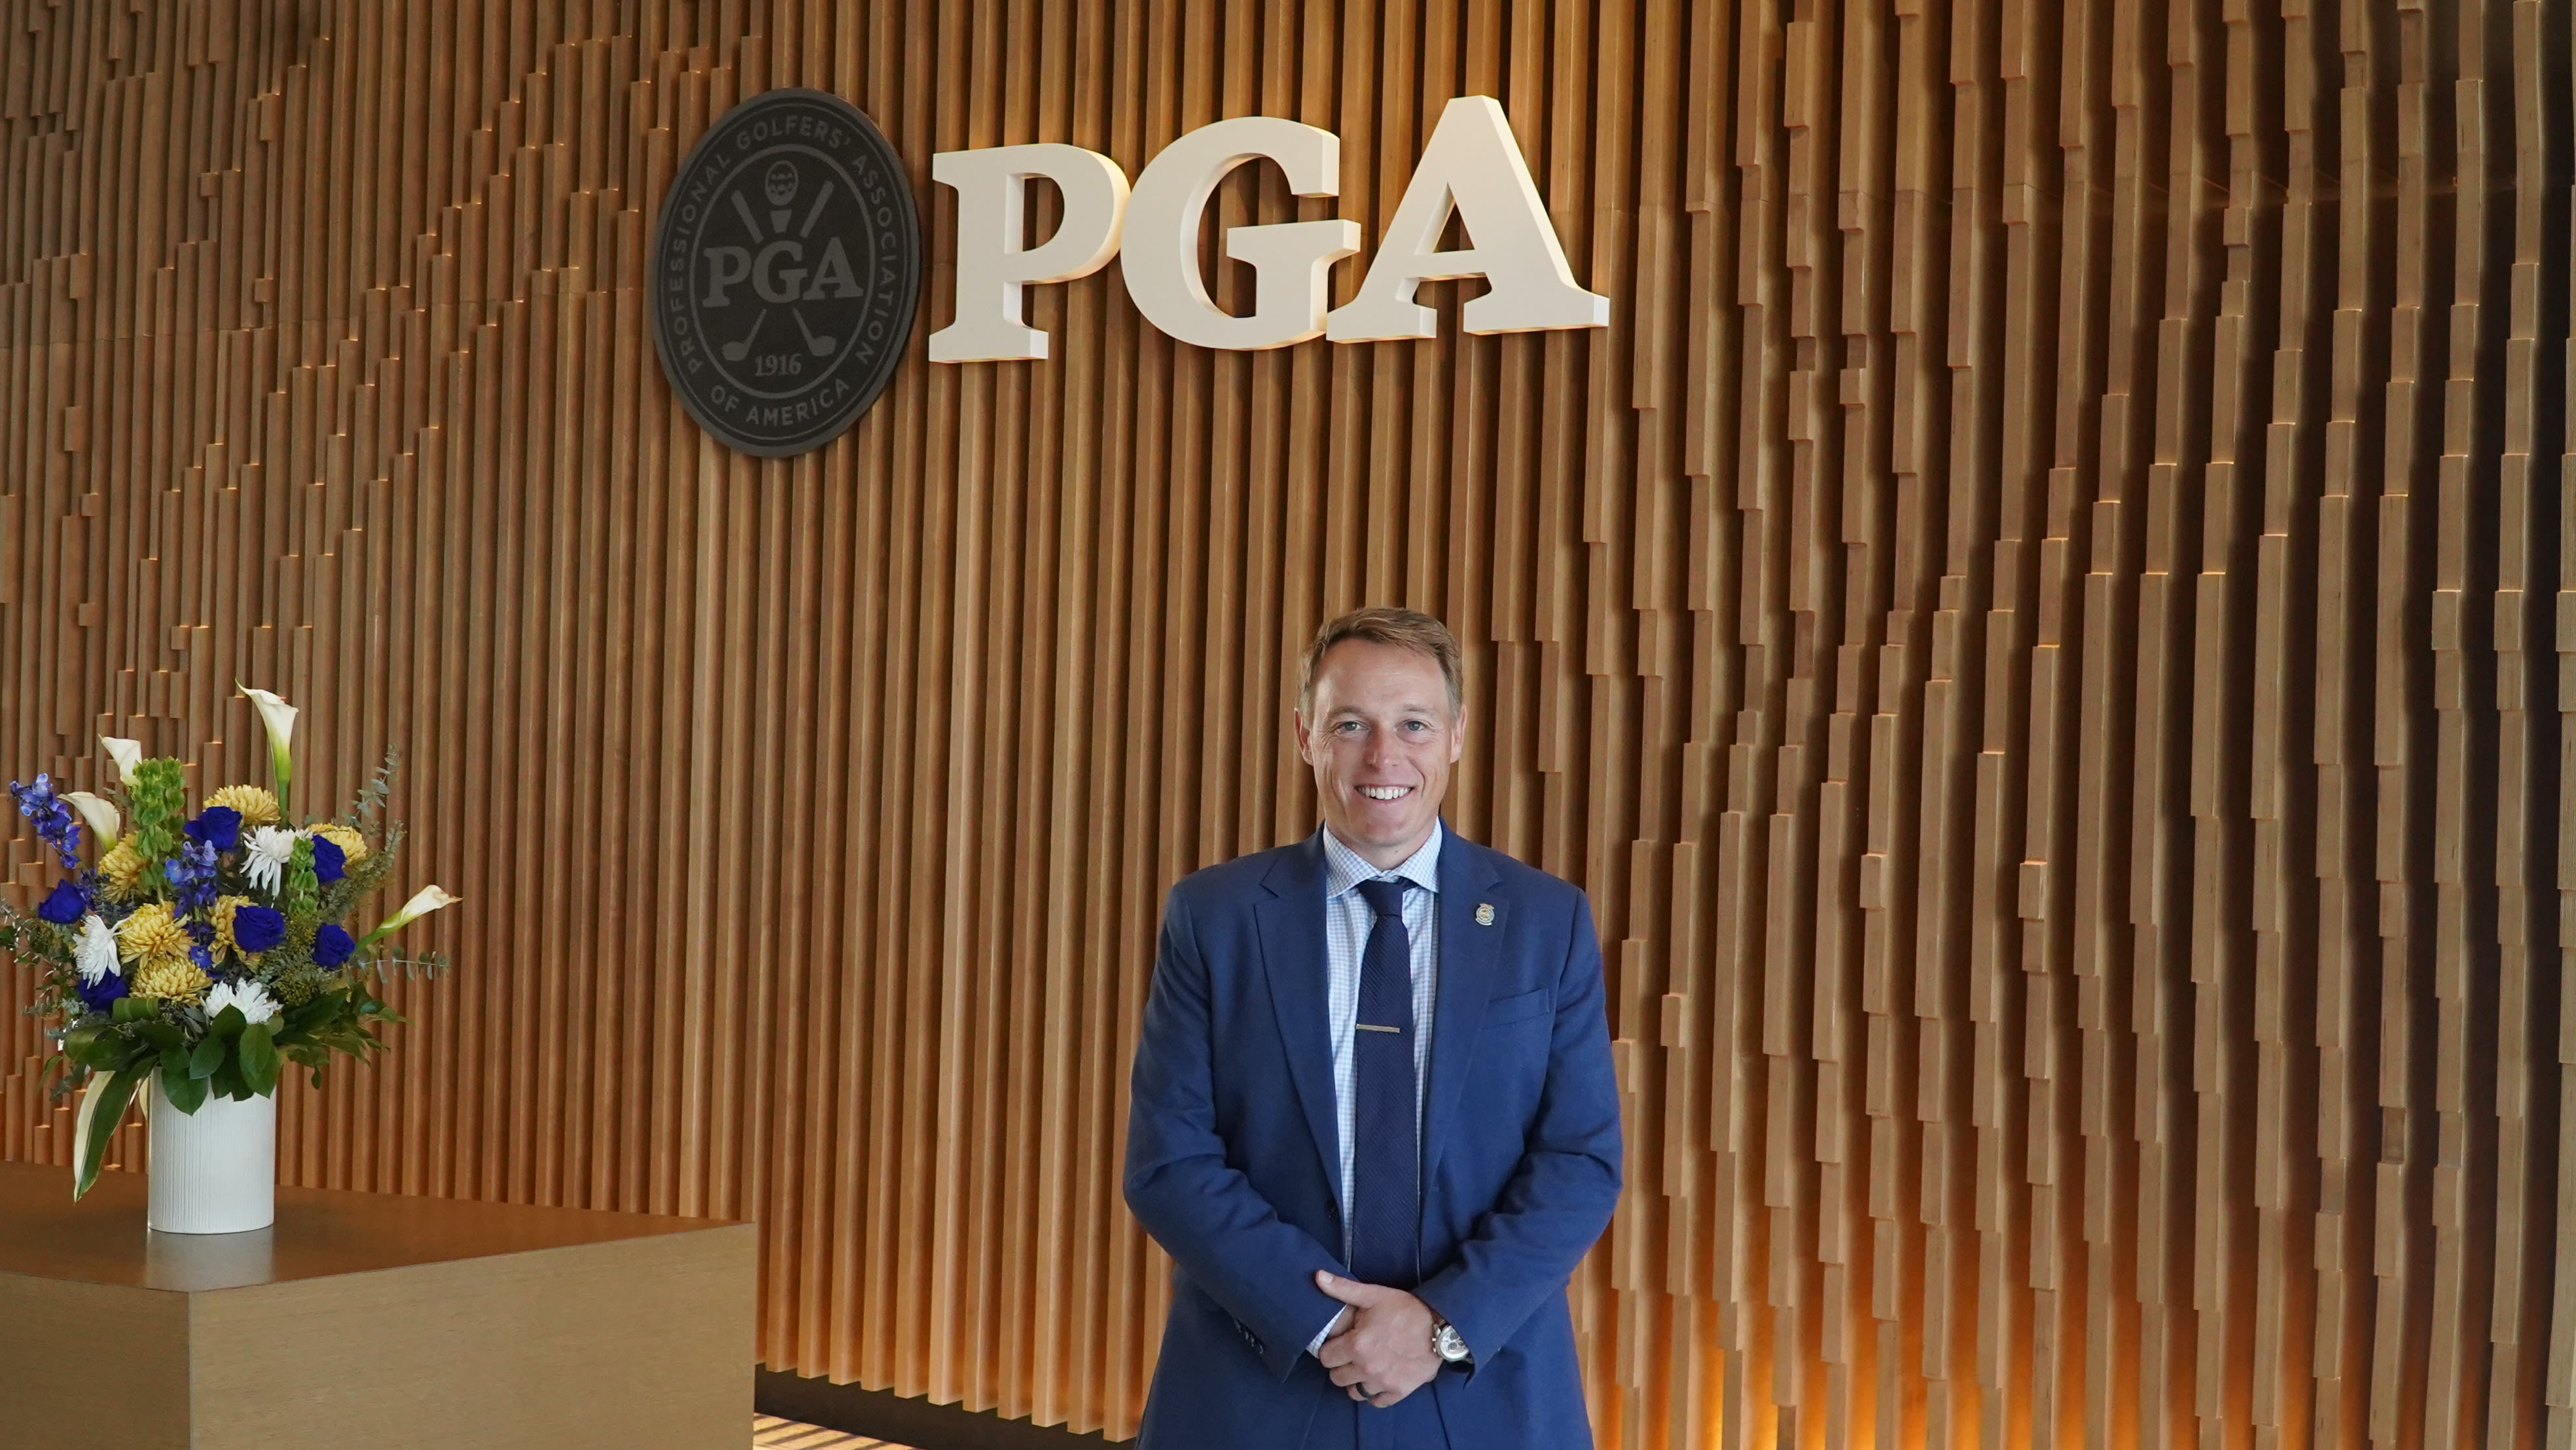 Jacob Spott at the Home of the PGA of America in Frisco, Texas.